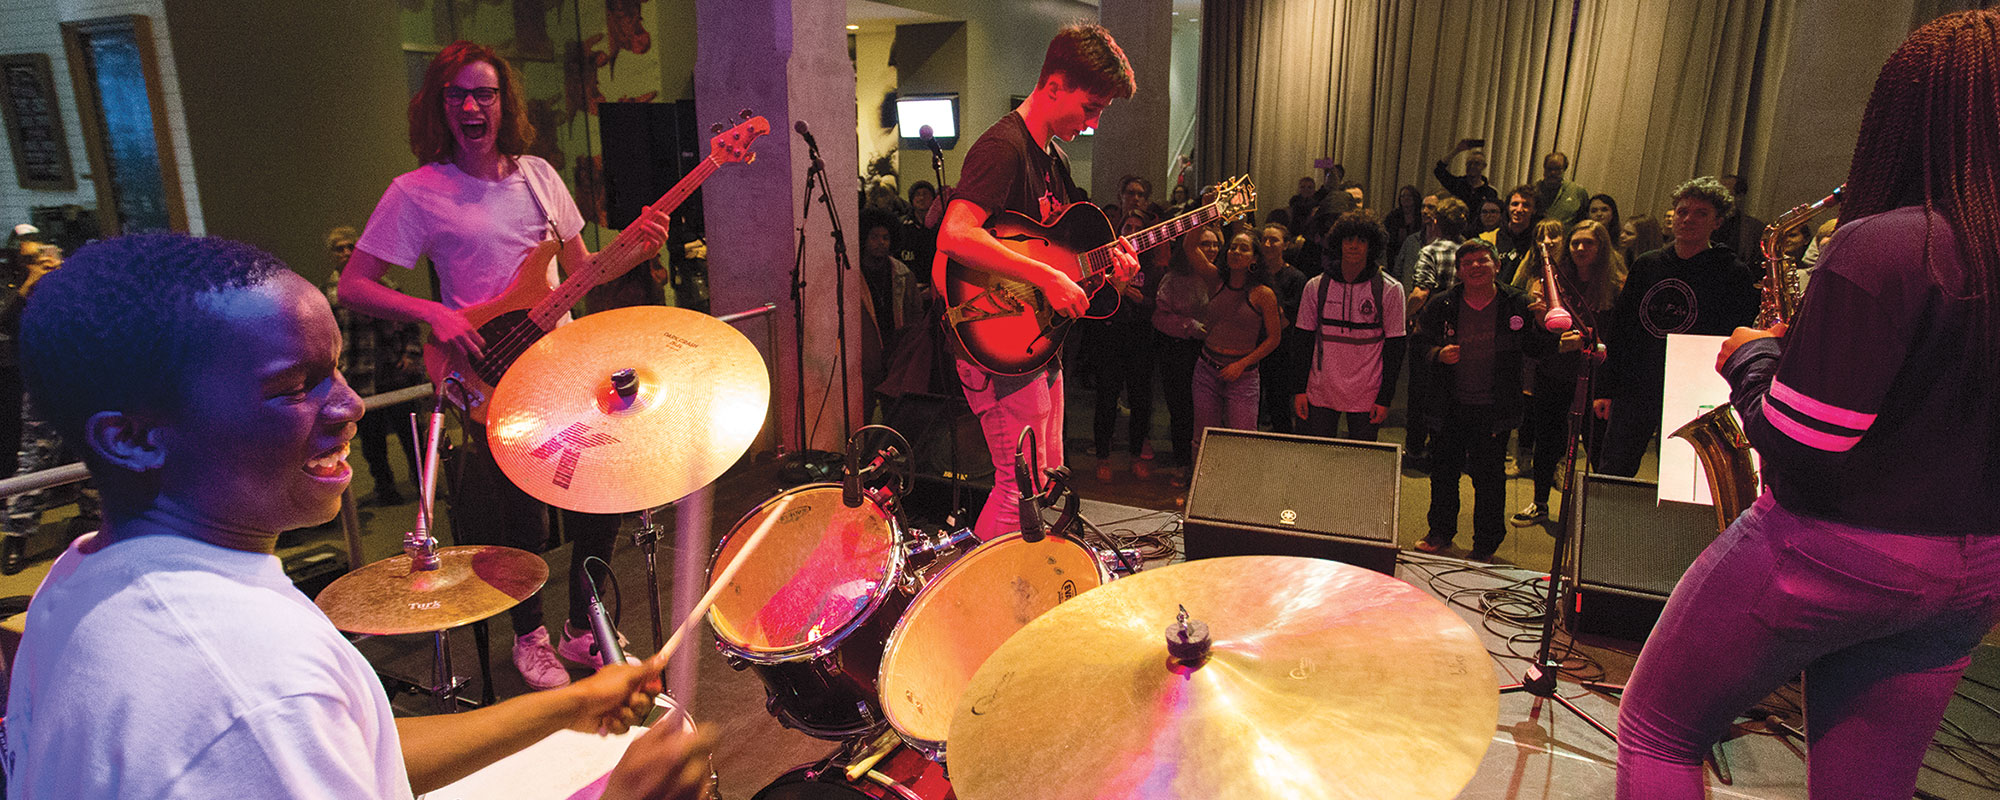 A group of teens in a band playing music on a stage at the Warhol museum